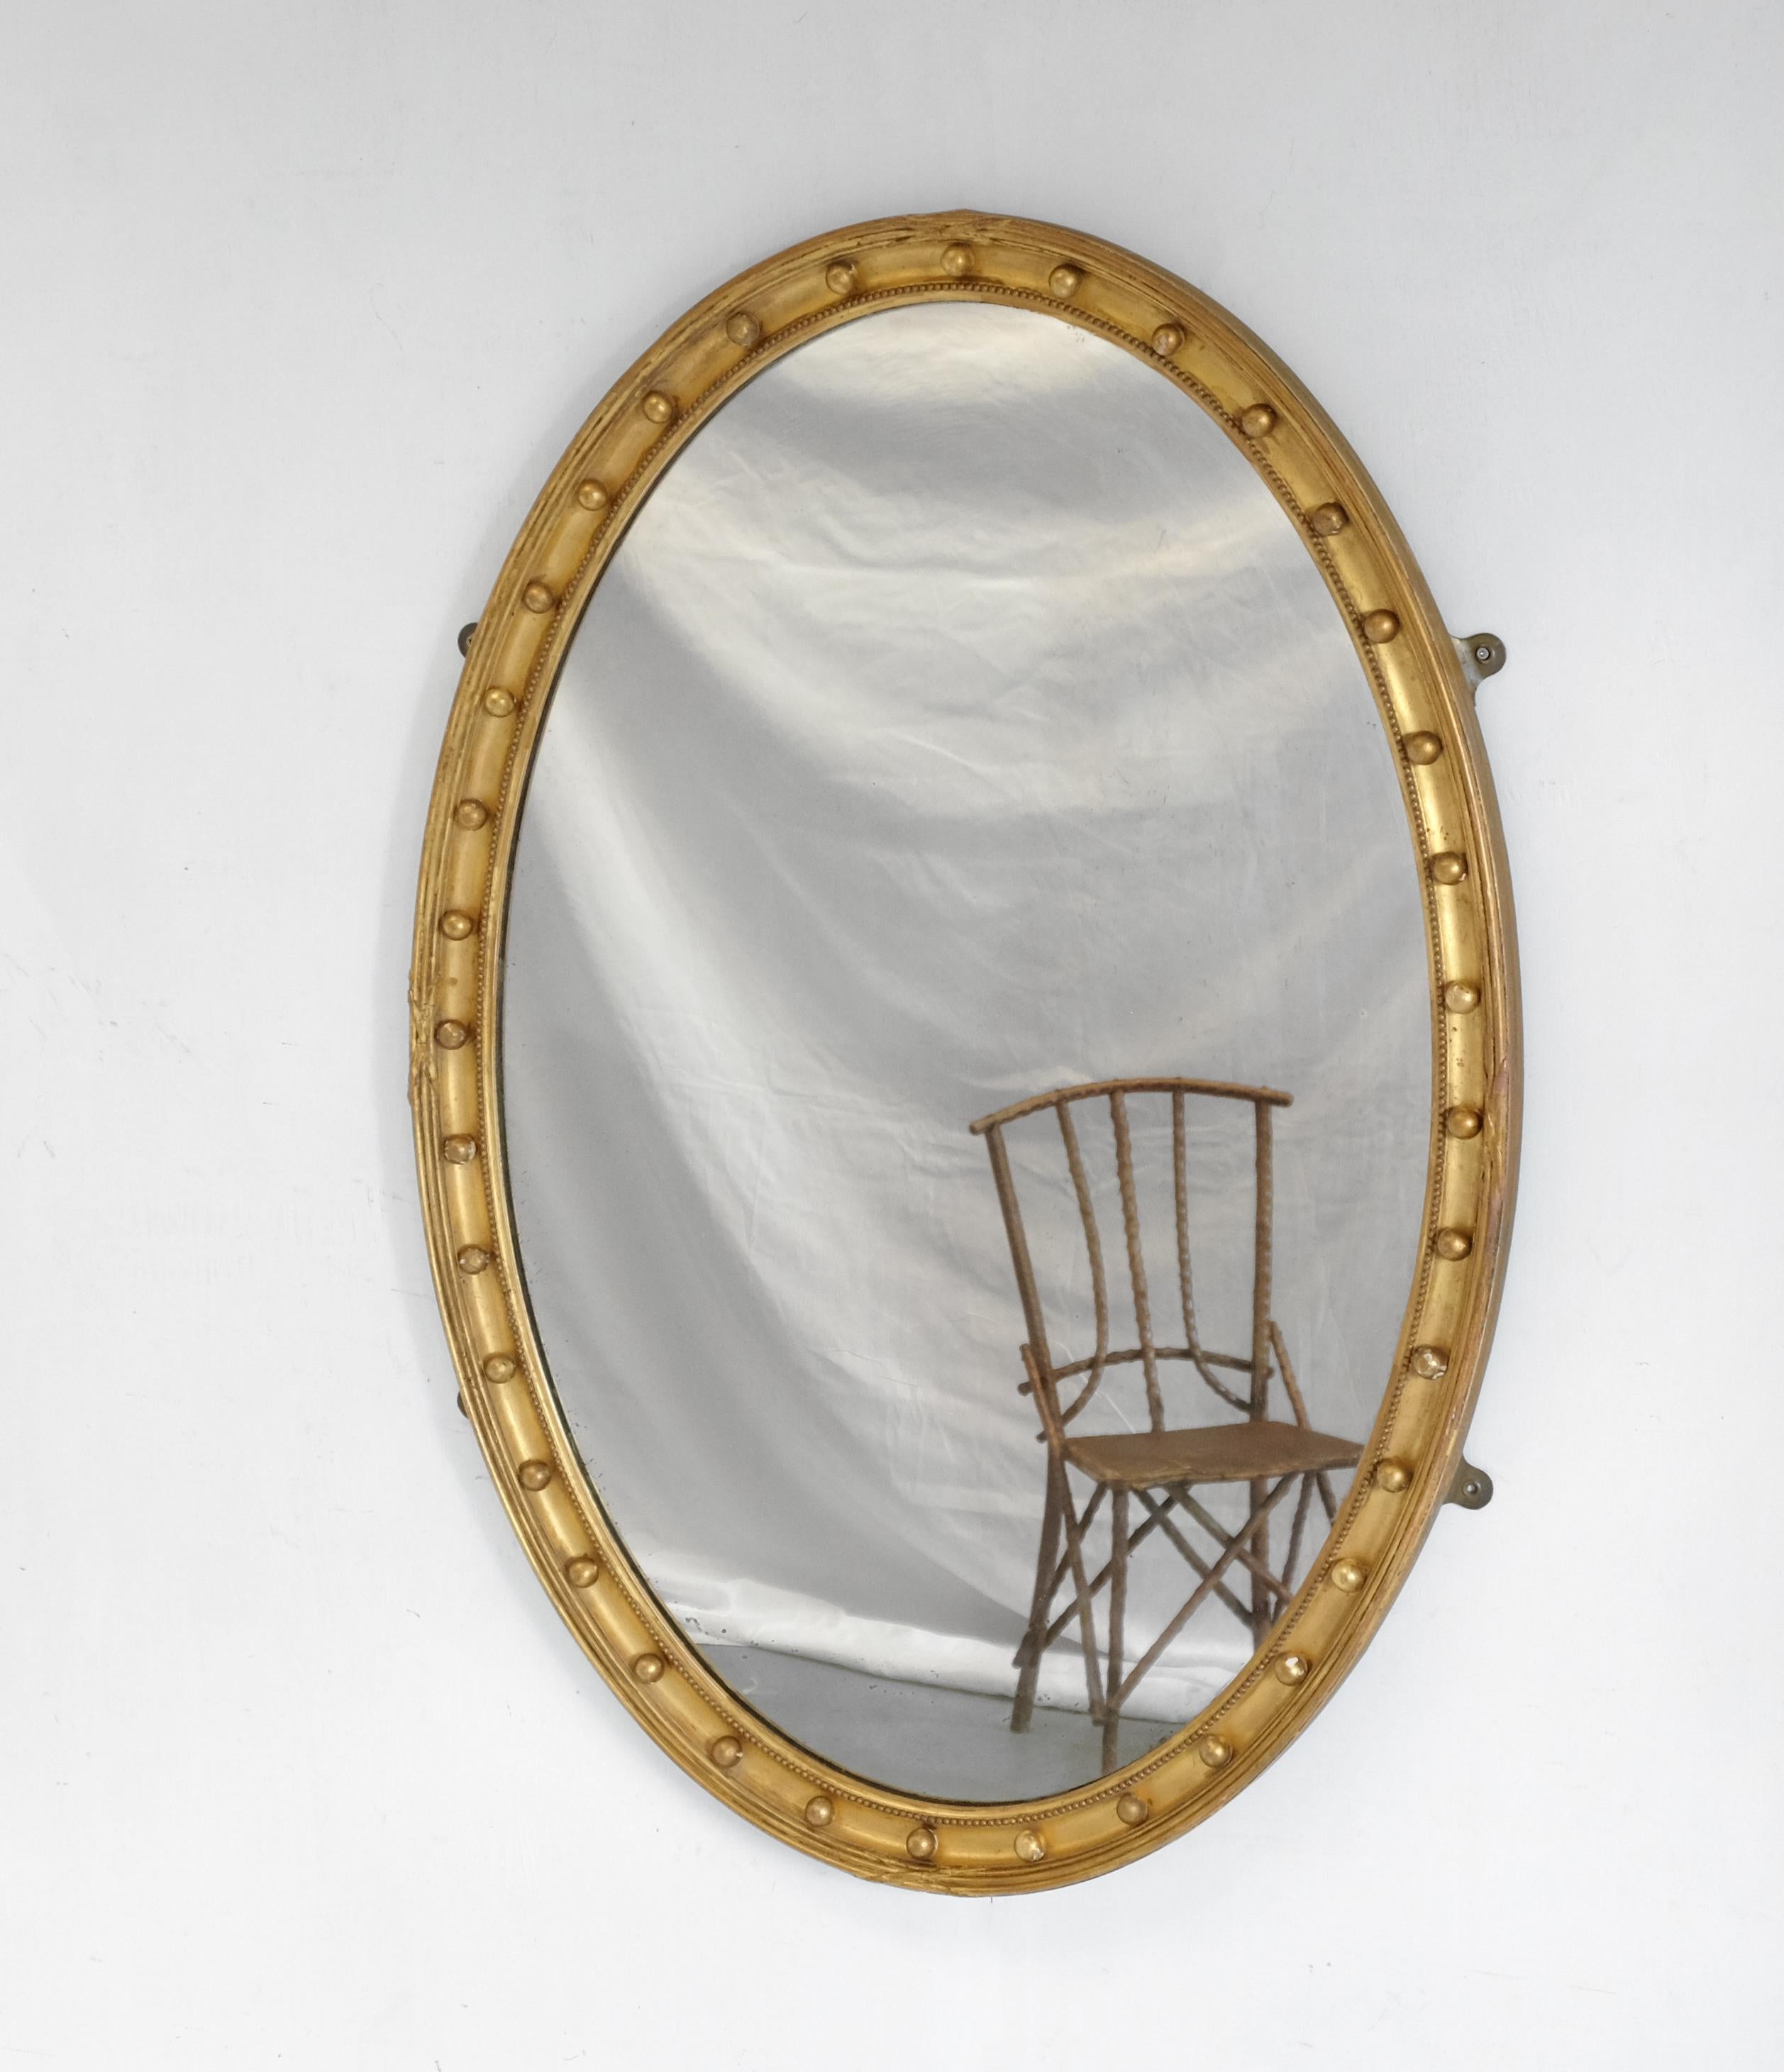 A large oval wall mirror in the Regency style. The giltwood frame with ribbon-tied reeding above a sphere filled cavetto. With original plate and backboards. Some light foxing and age-related fading to the glass. Can be hung portrait or landscape.